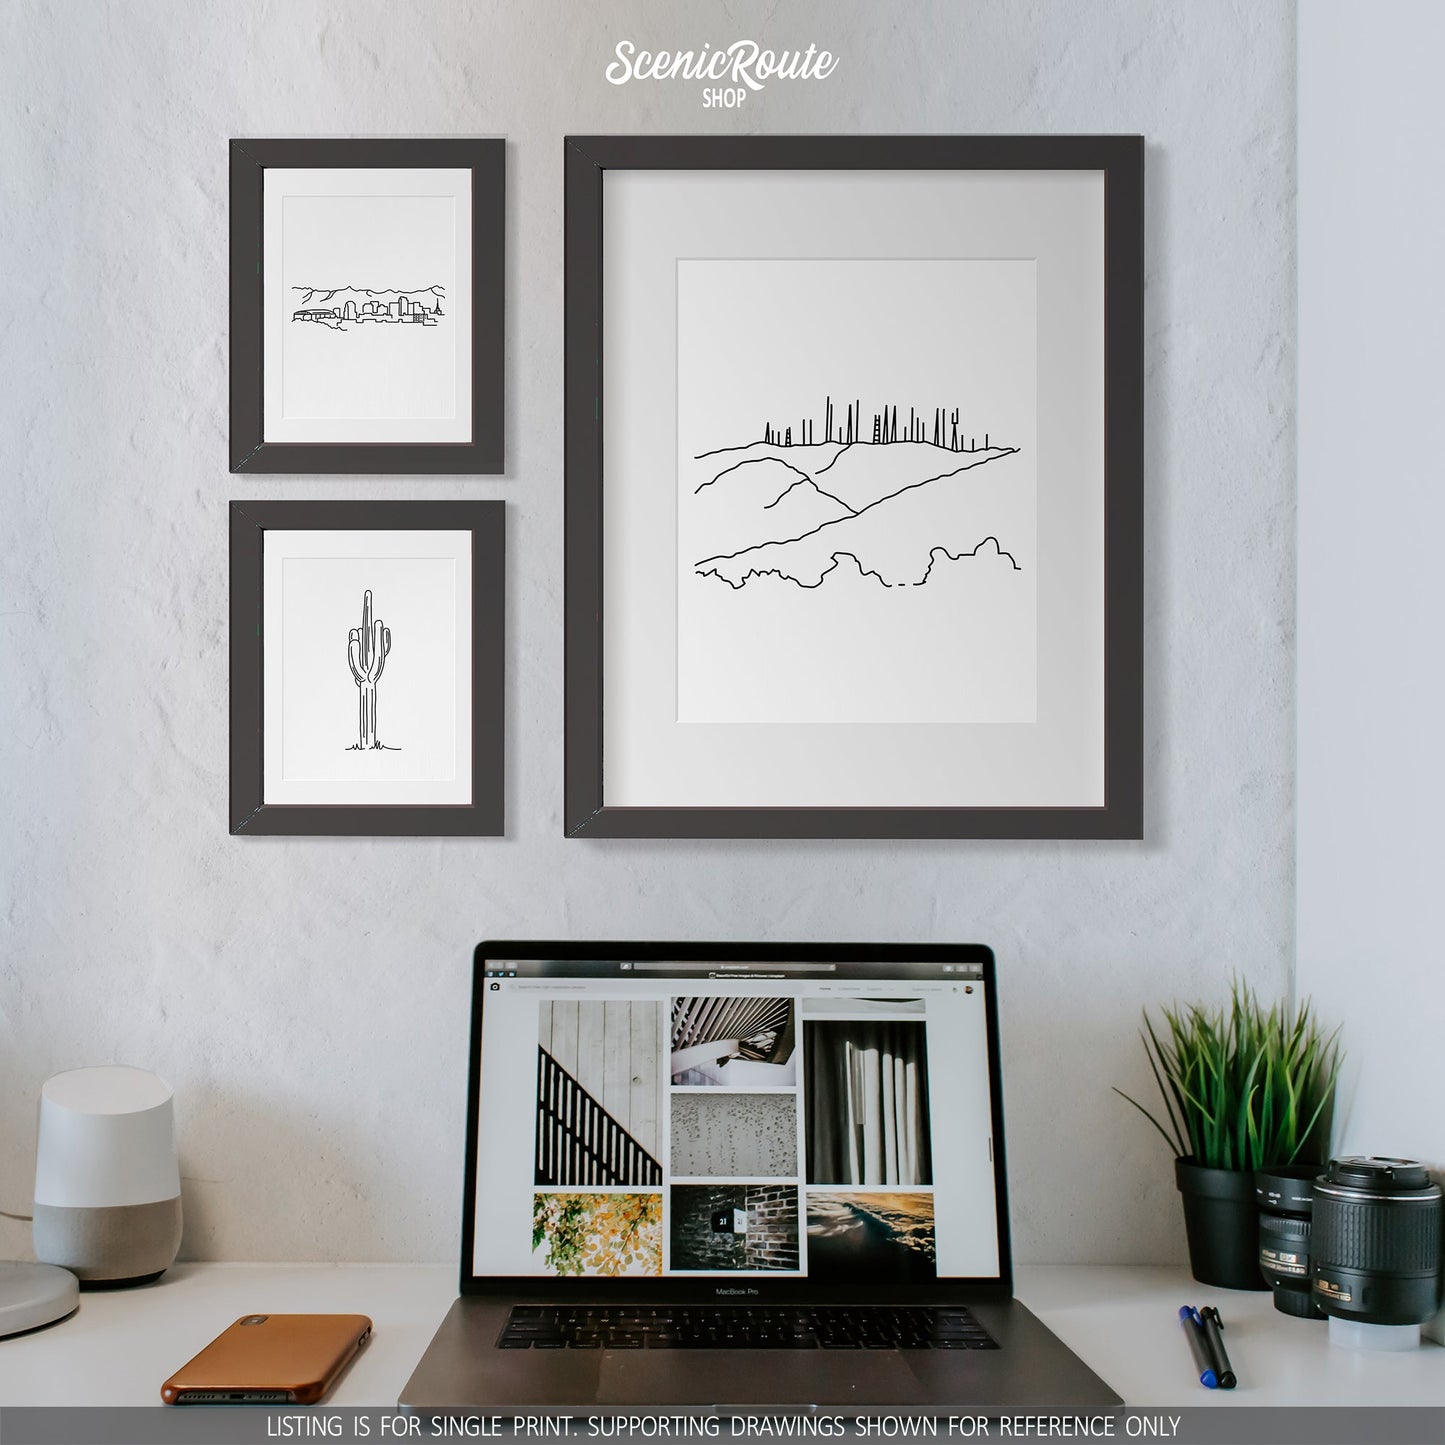 A group of three framed drawings on a wall above a desk with a laptop. The line art drawings include the Phoenix Skyline, a Saguaro Cactus, and Phoenix South Mountain